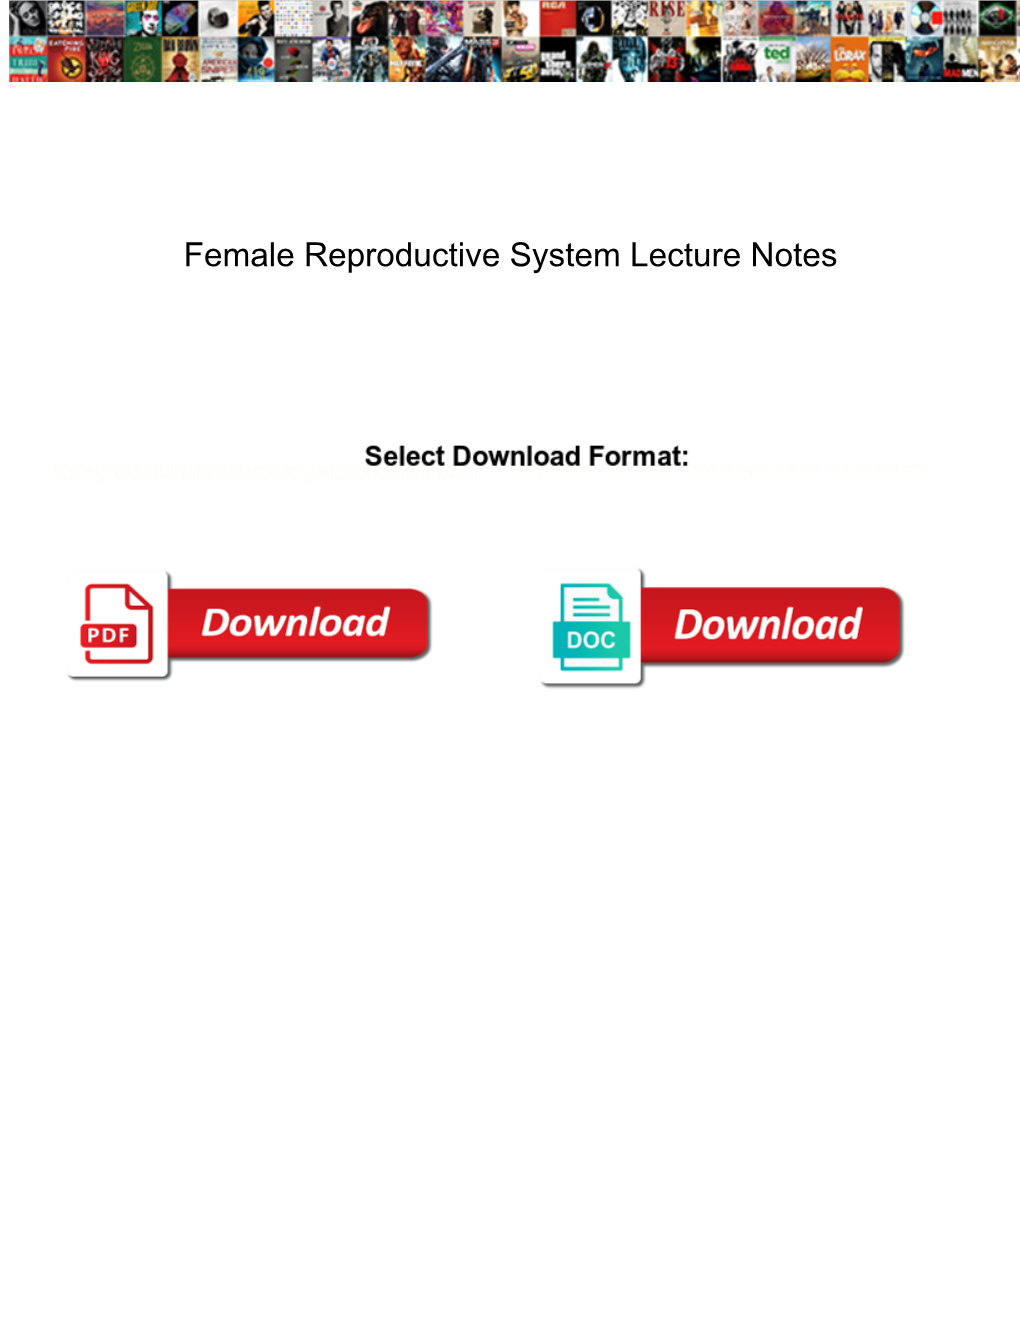 Female Reproductive System Lecture Notes